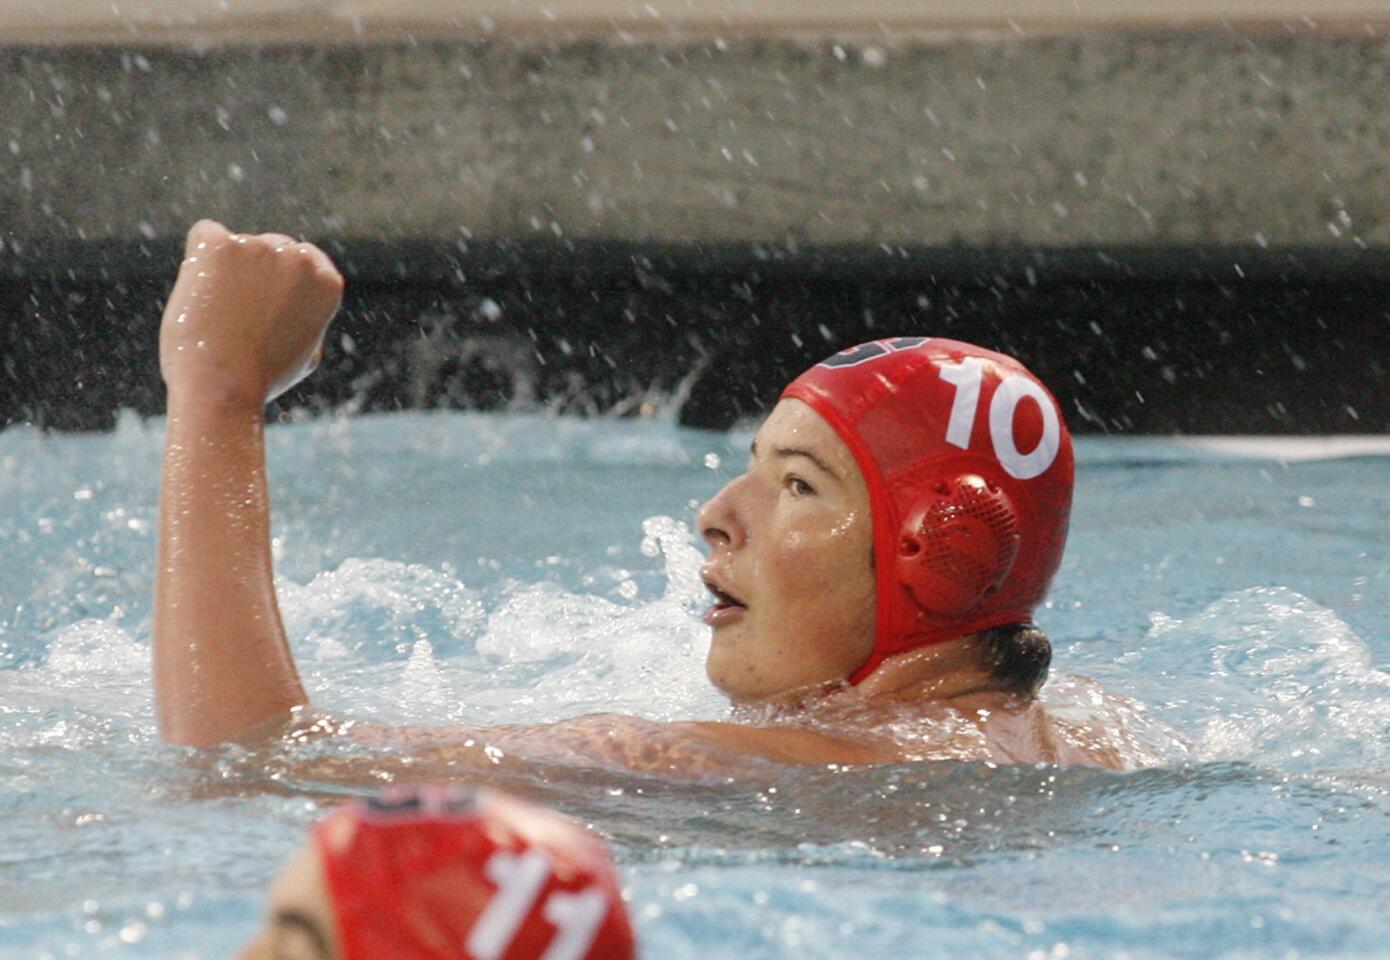 Glendale's Arman Momdzhyan fist pumps after scoring against Burroughs in a CIF boys water Pacific League prelim at Burbank High School on Tuesday, October 30, 2012.